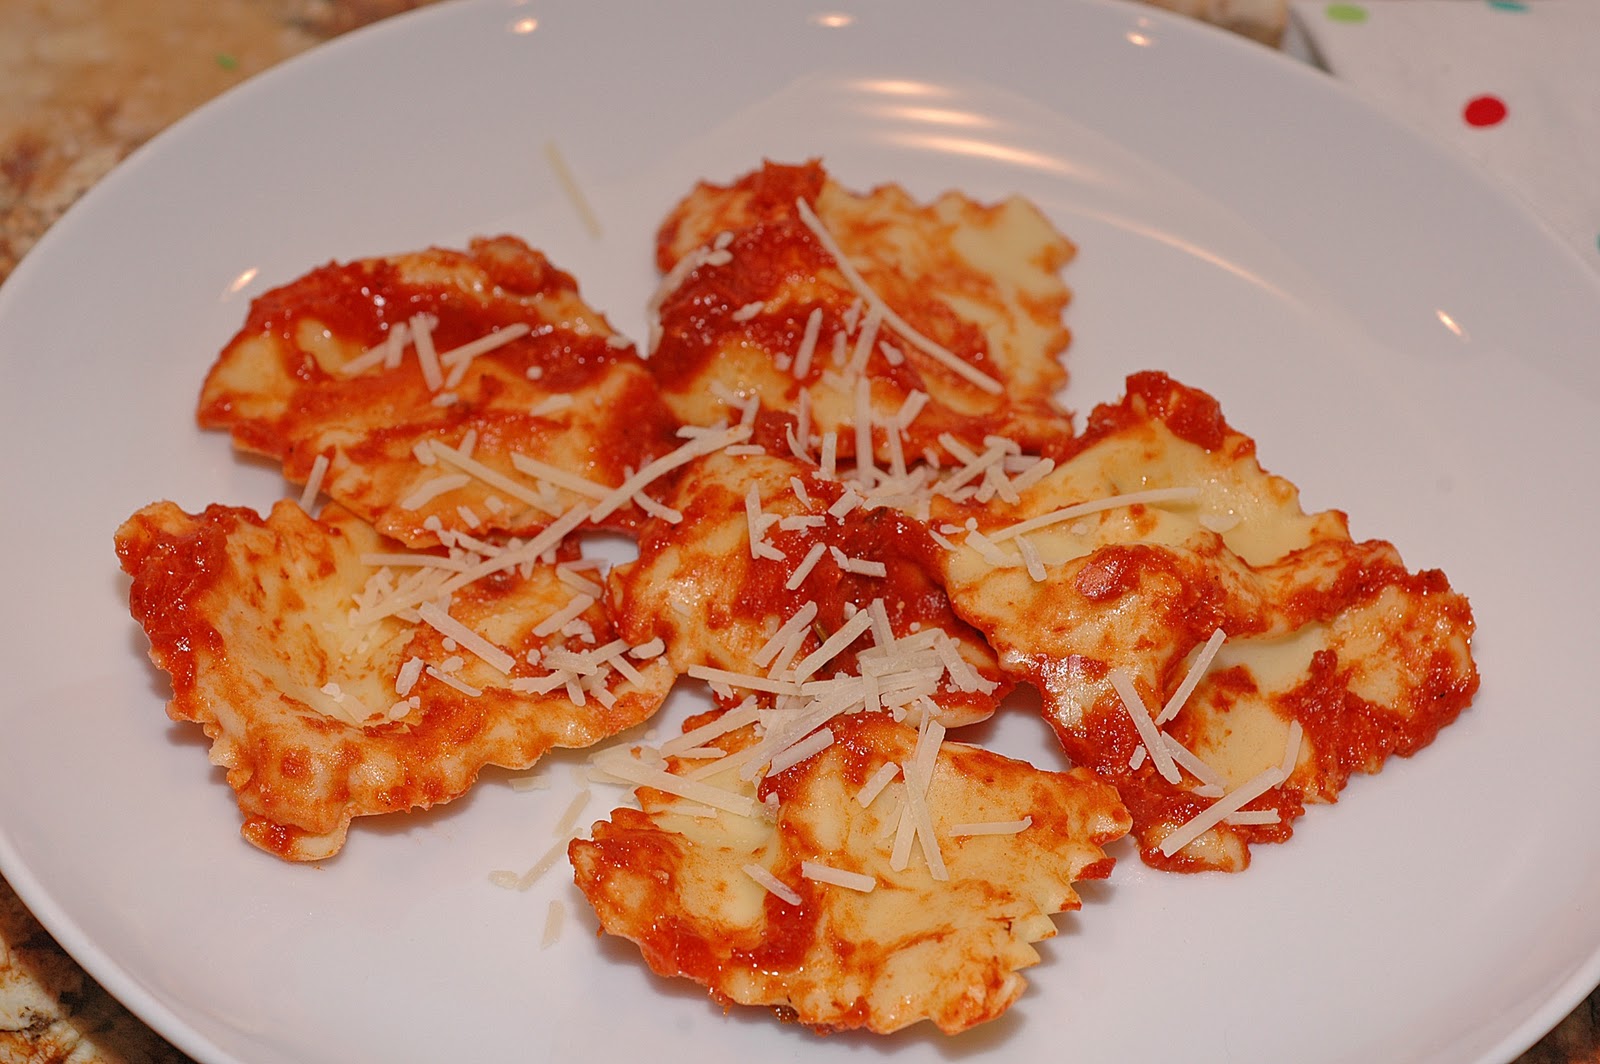 A busy lizzie life: Busy Cooking: Homemade Four Cheese Ravioli